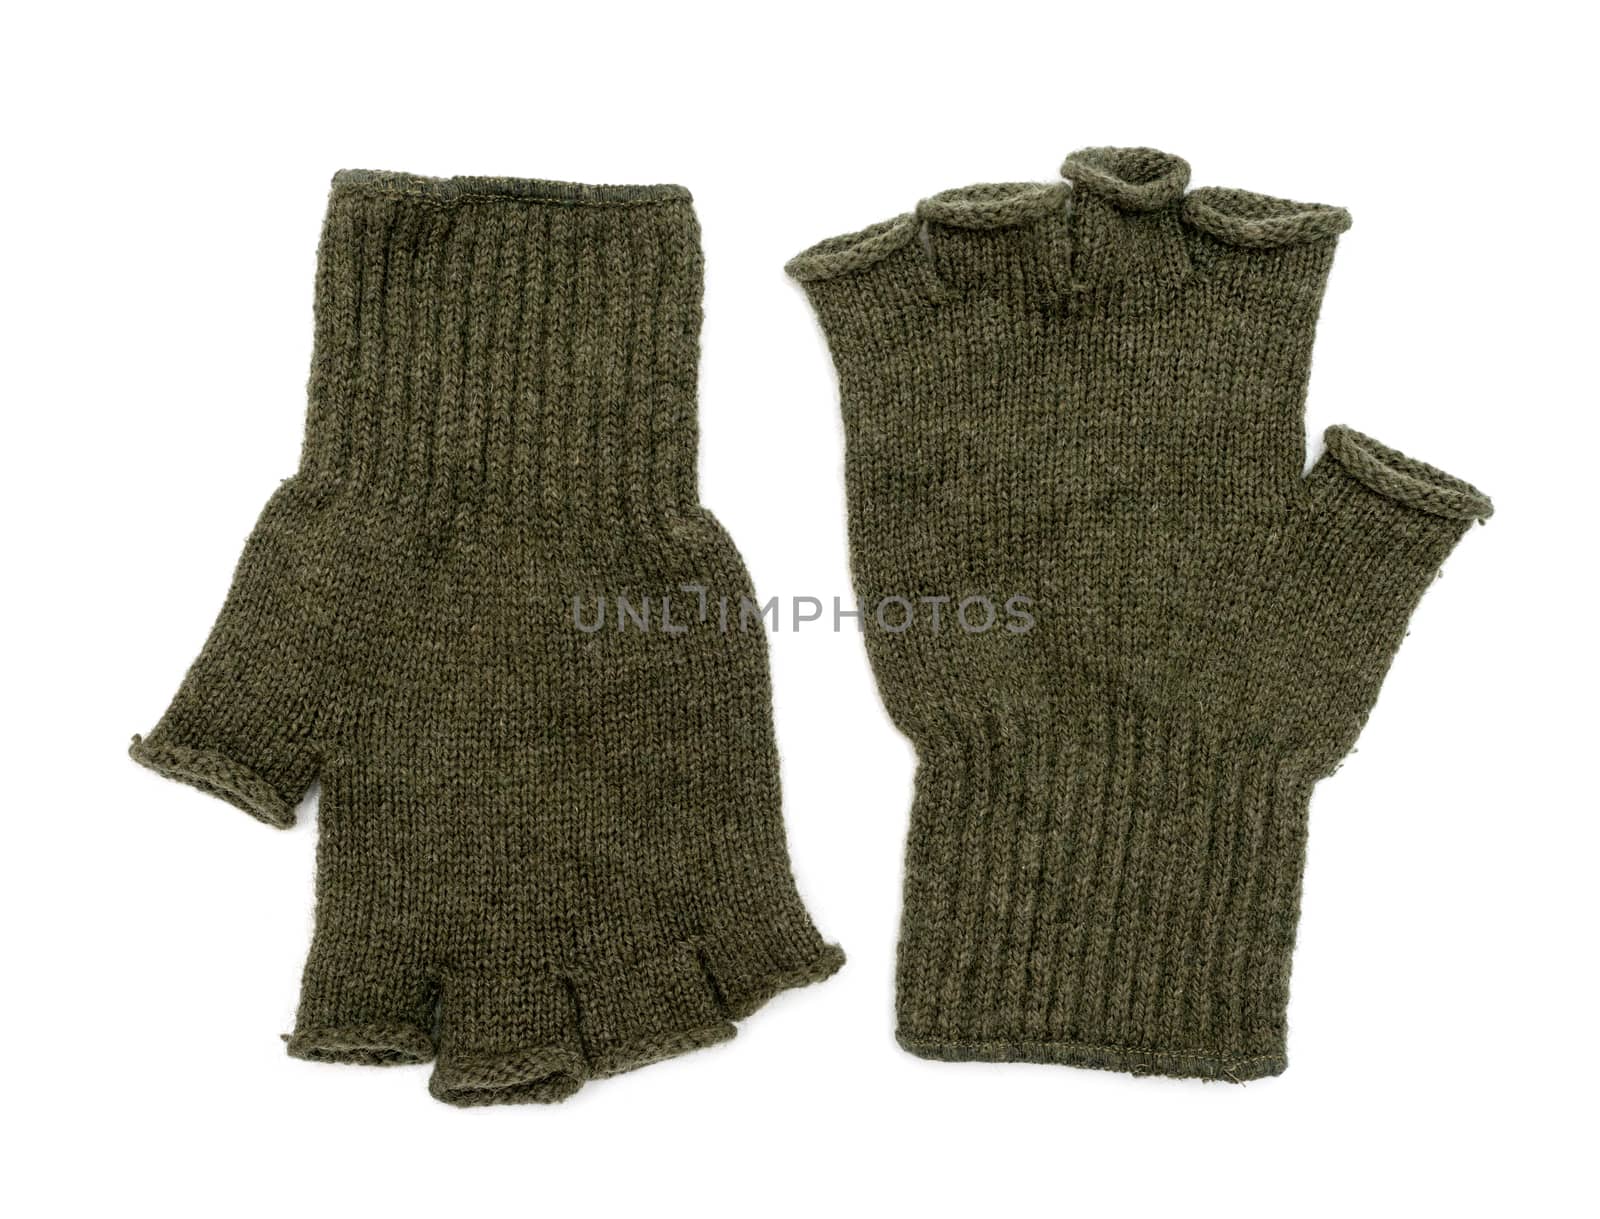 New Green Knit Wool Gloves isolated on white background by DNKSTUDIO